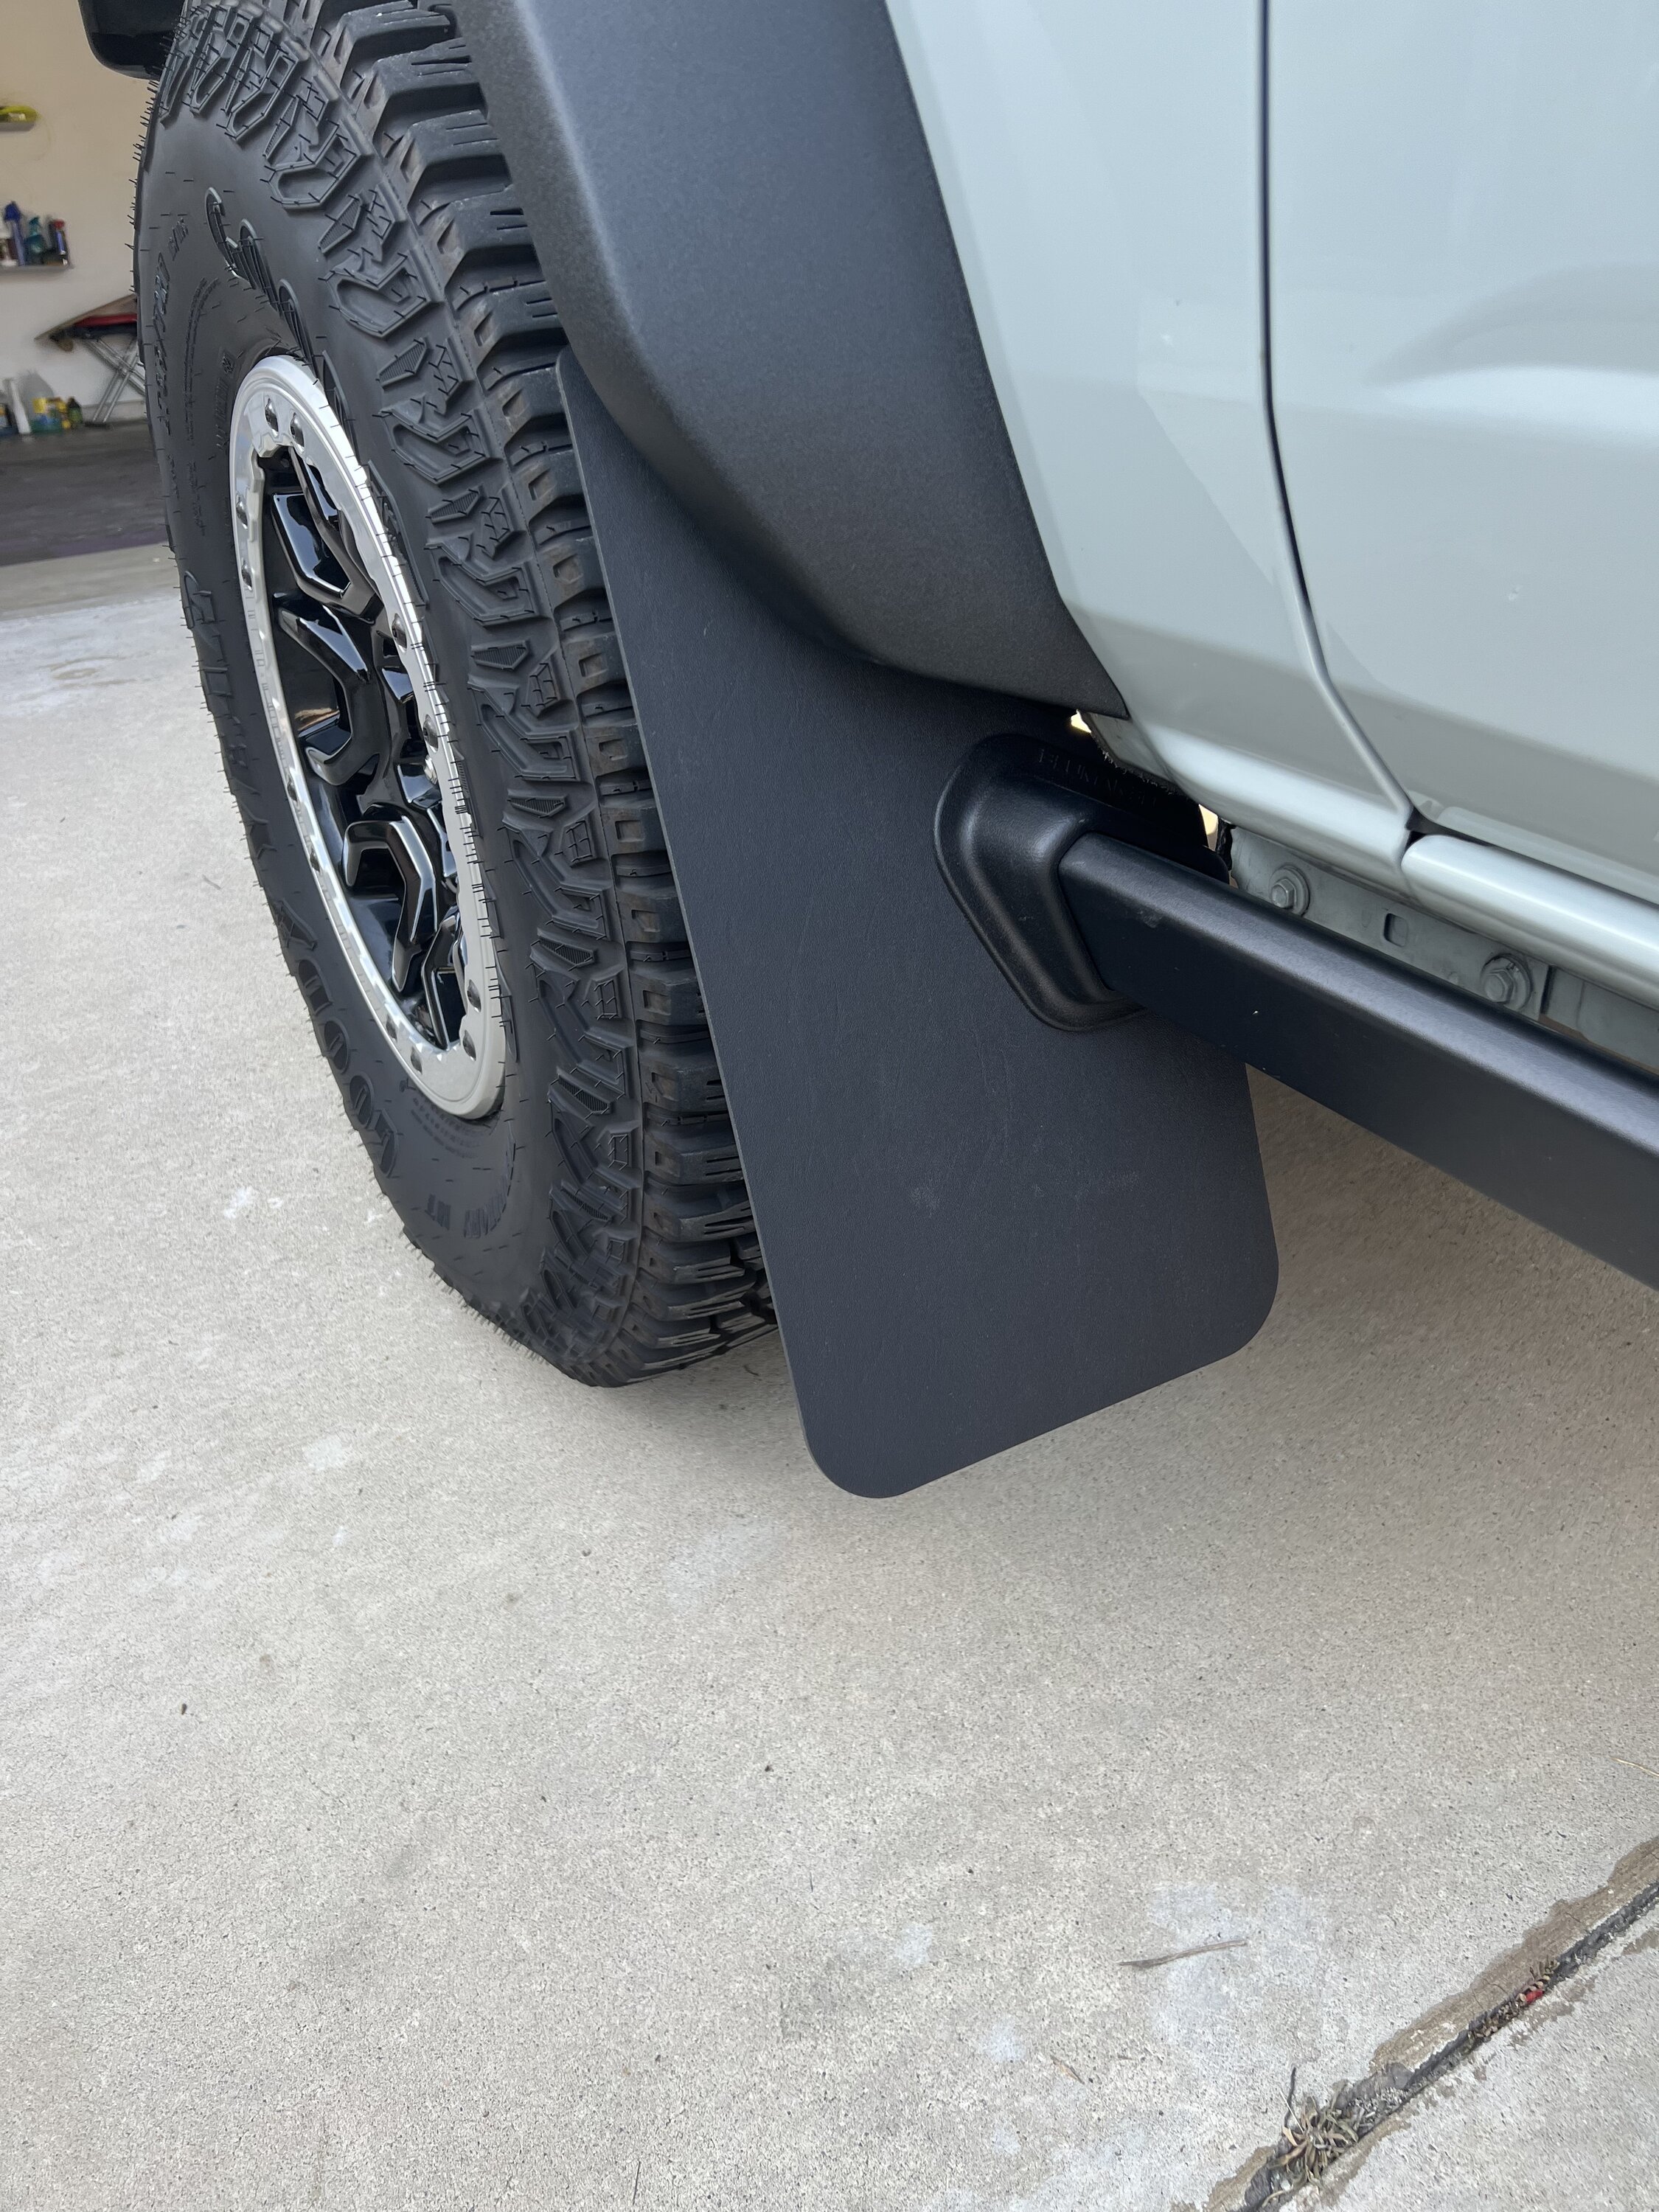 Ford Bronco BLUMAK3D Mud Flaps Install and Review 4F9EE037-A9D8-40D9-8408-FC42ED2908C9